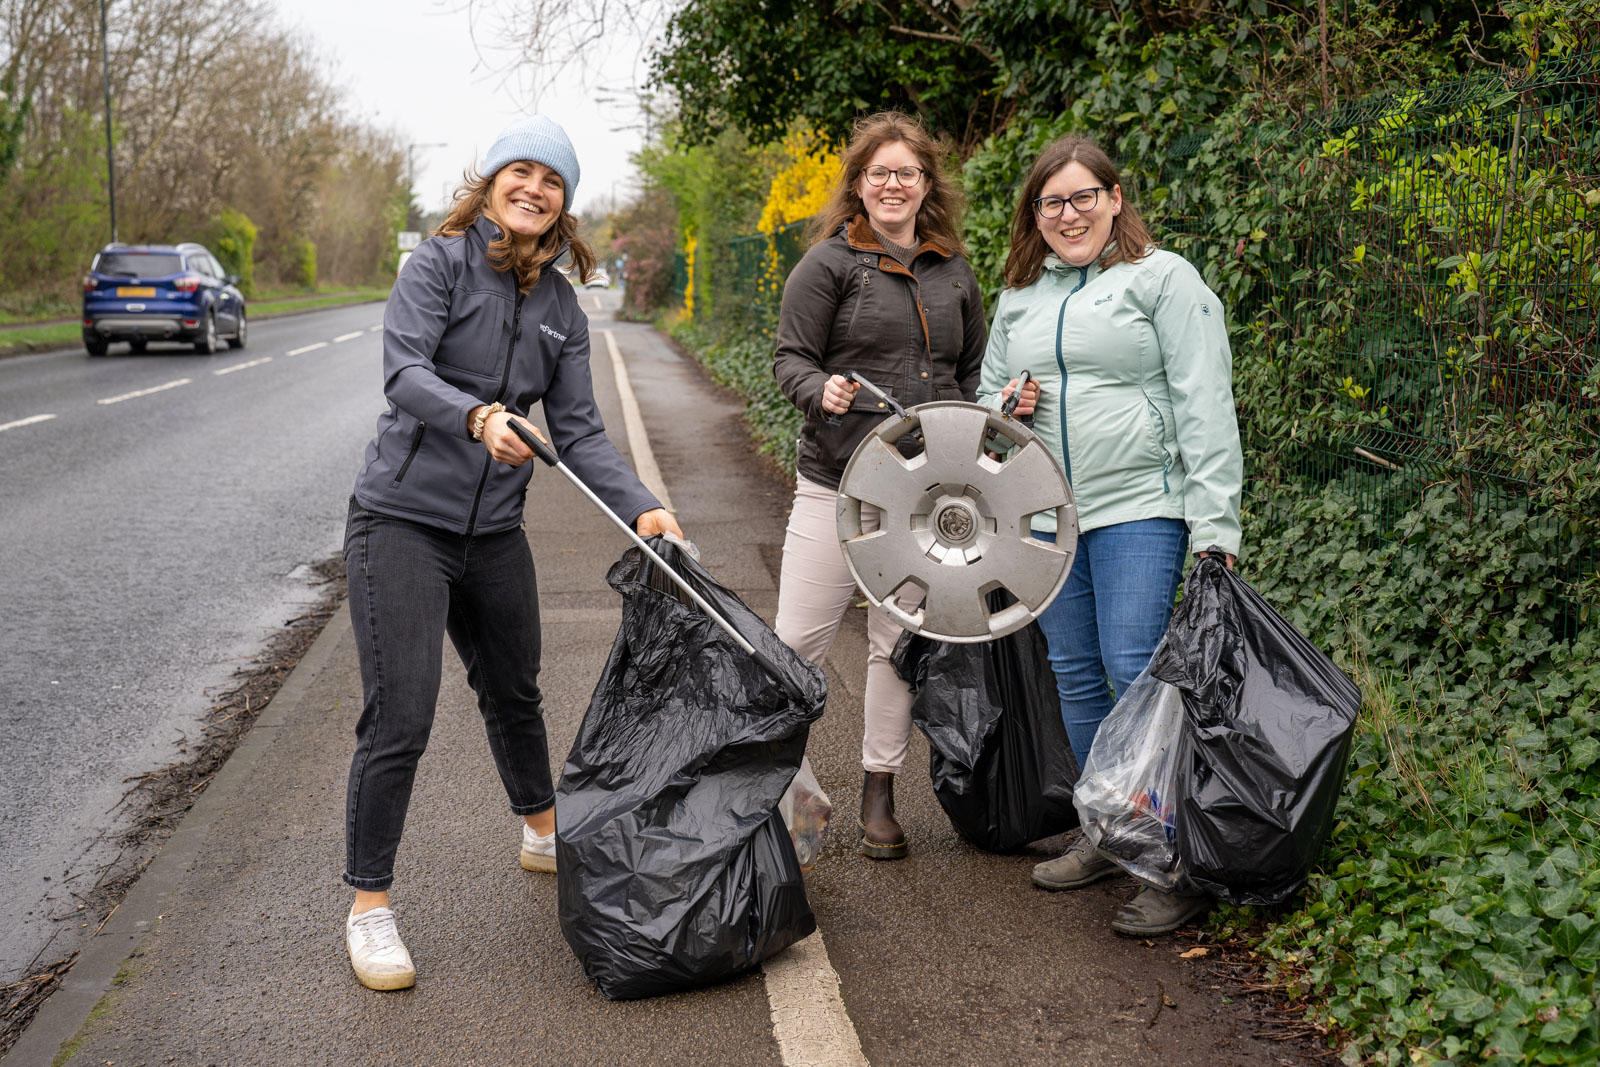 Colleagues holding a hubcap found during the litter pick.